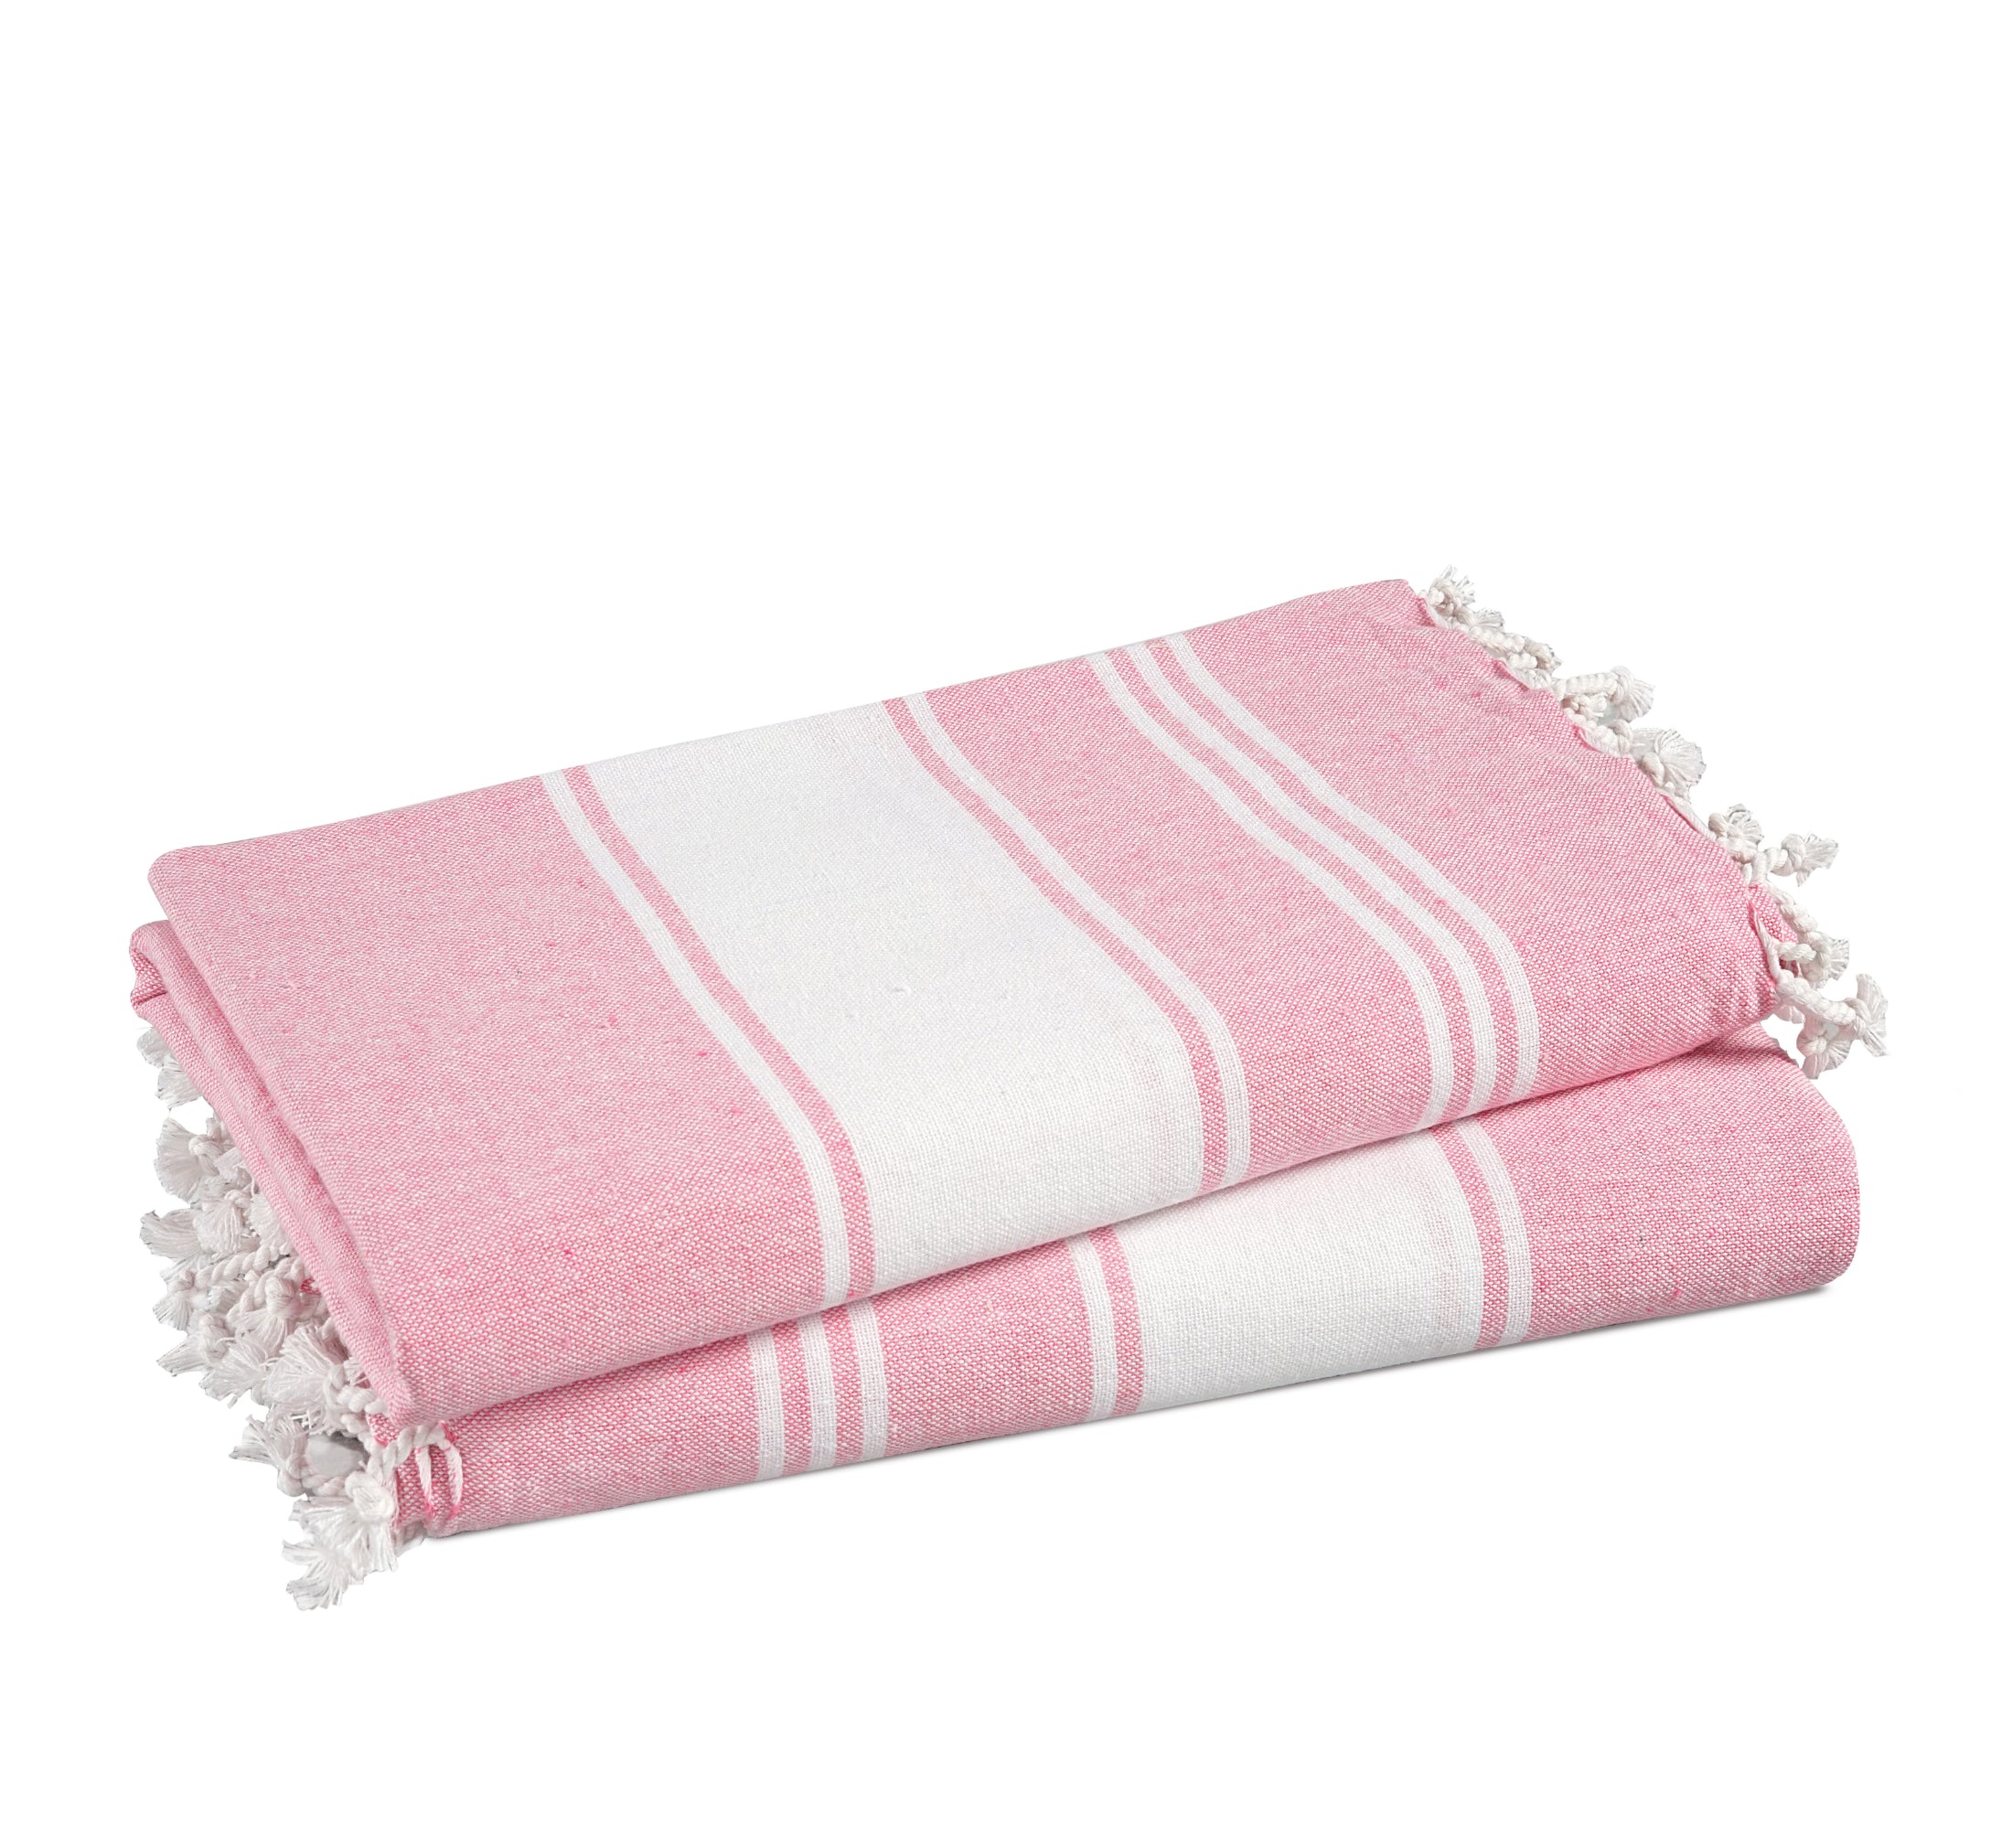 Set of 2 100% Cotton Chambray Turkish Beach Towels - Candy Pink